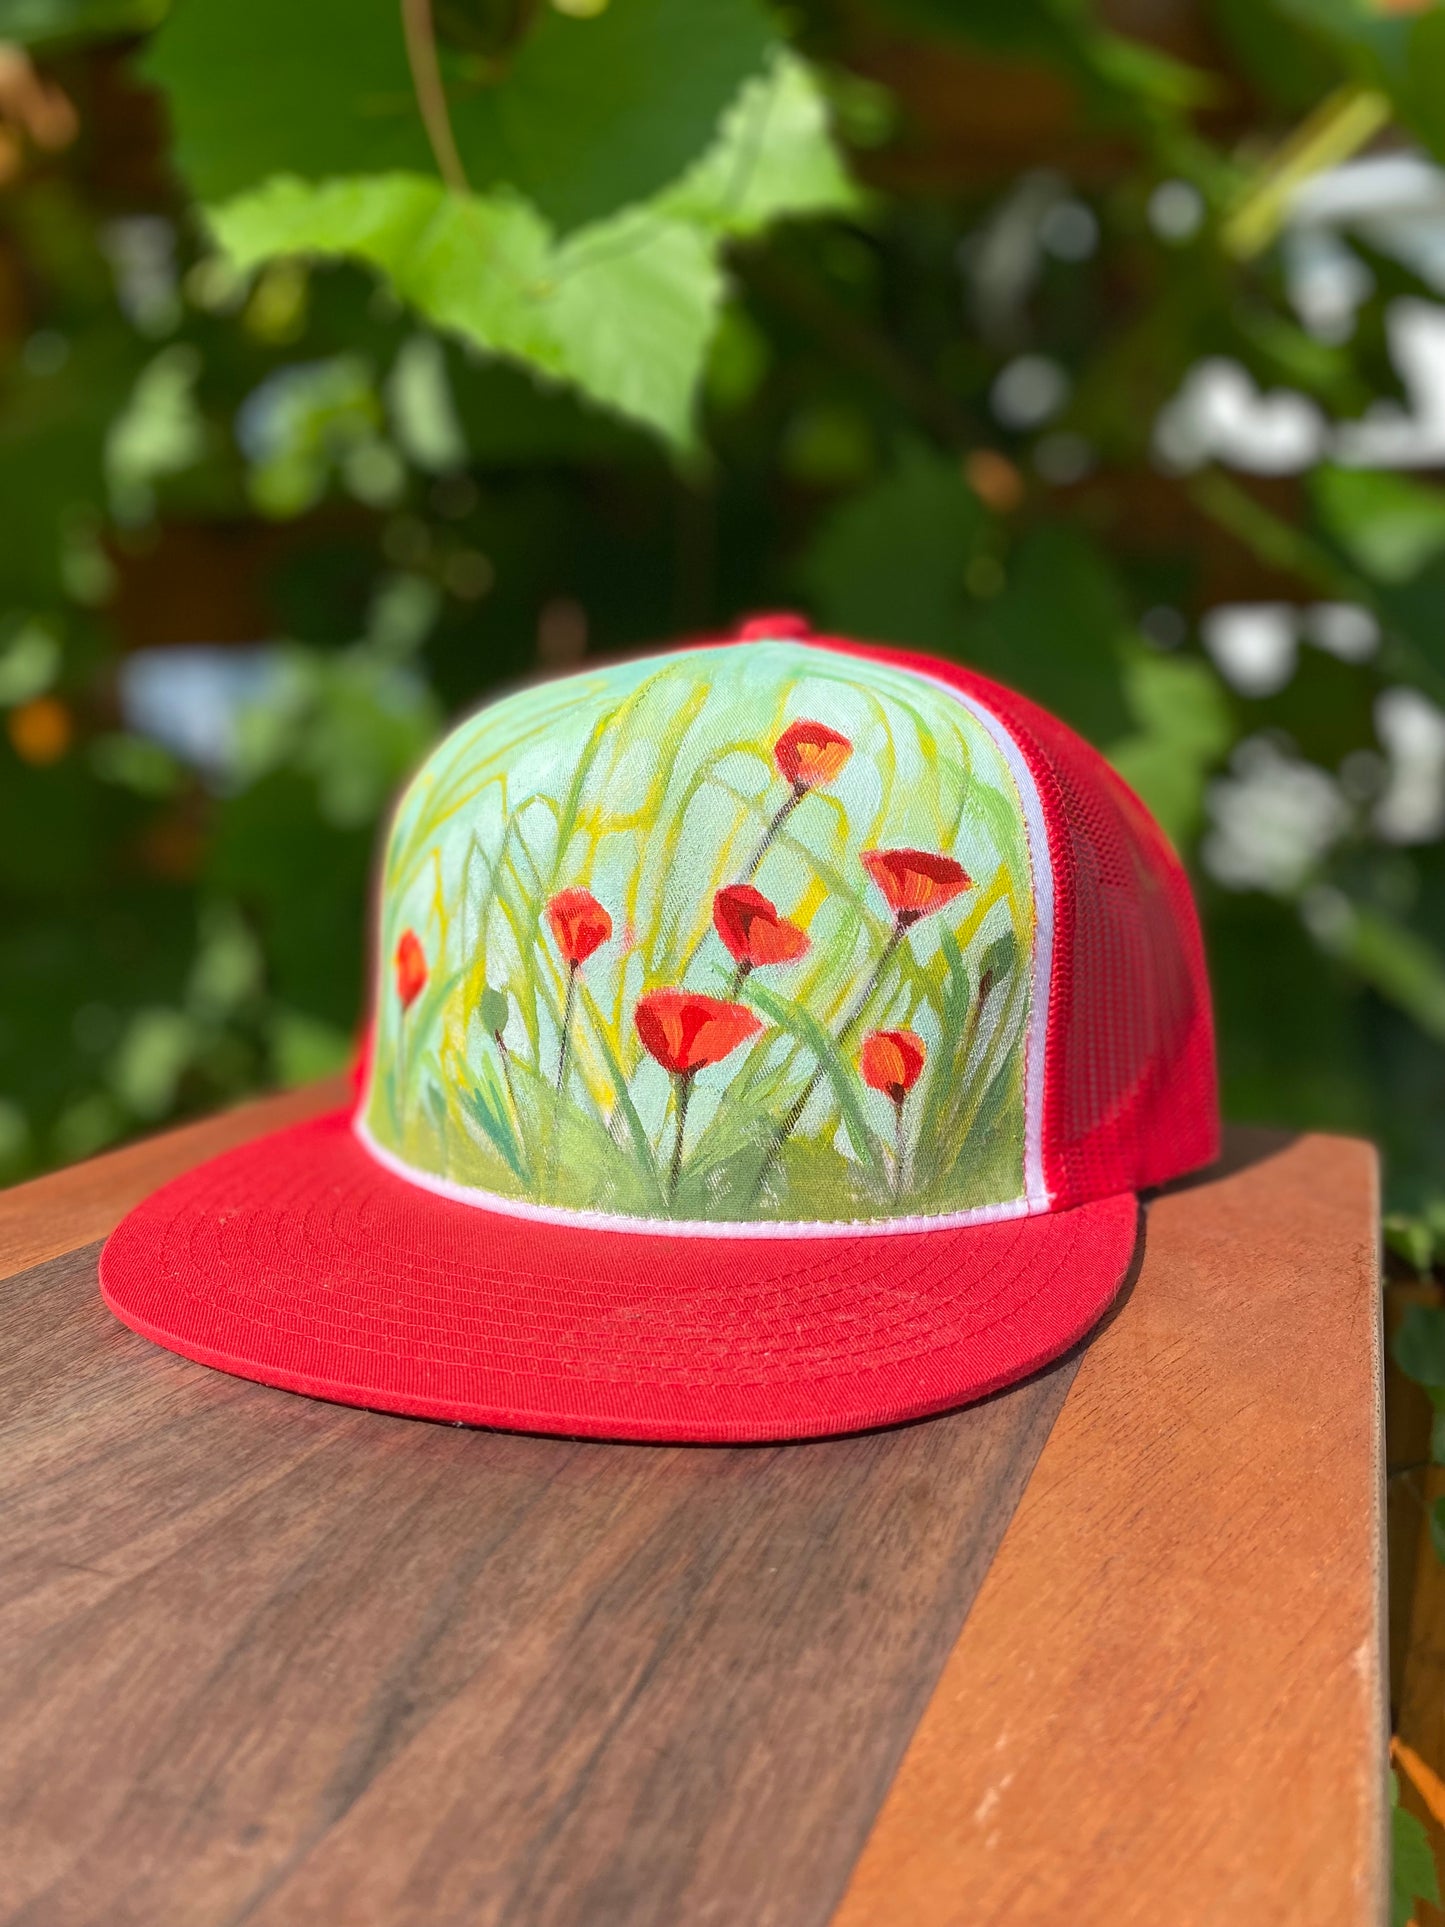 "Poppies on Red" Hand Painted Hat